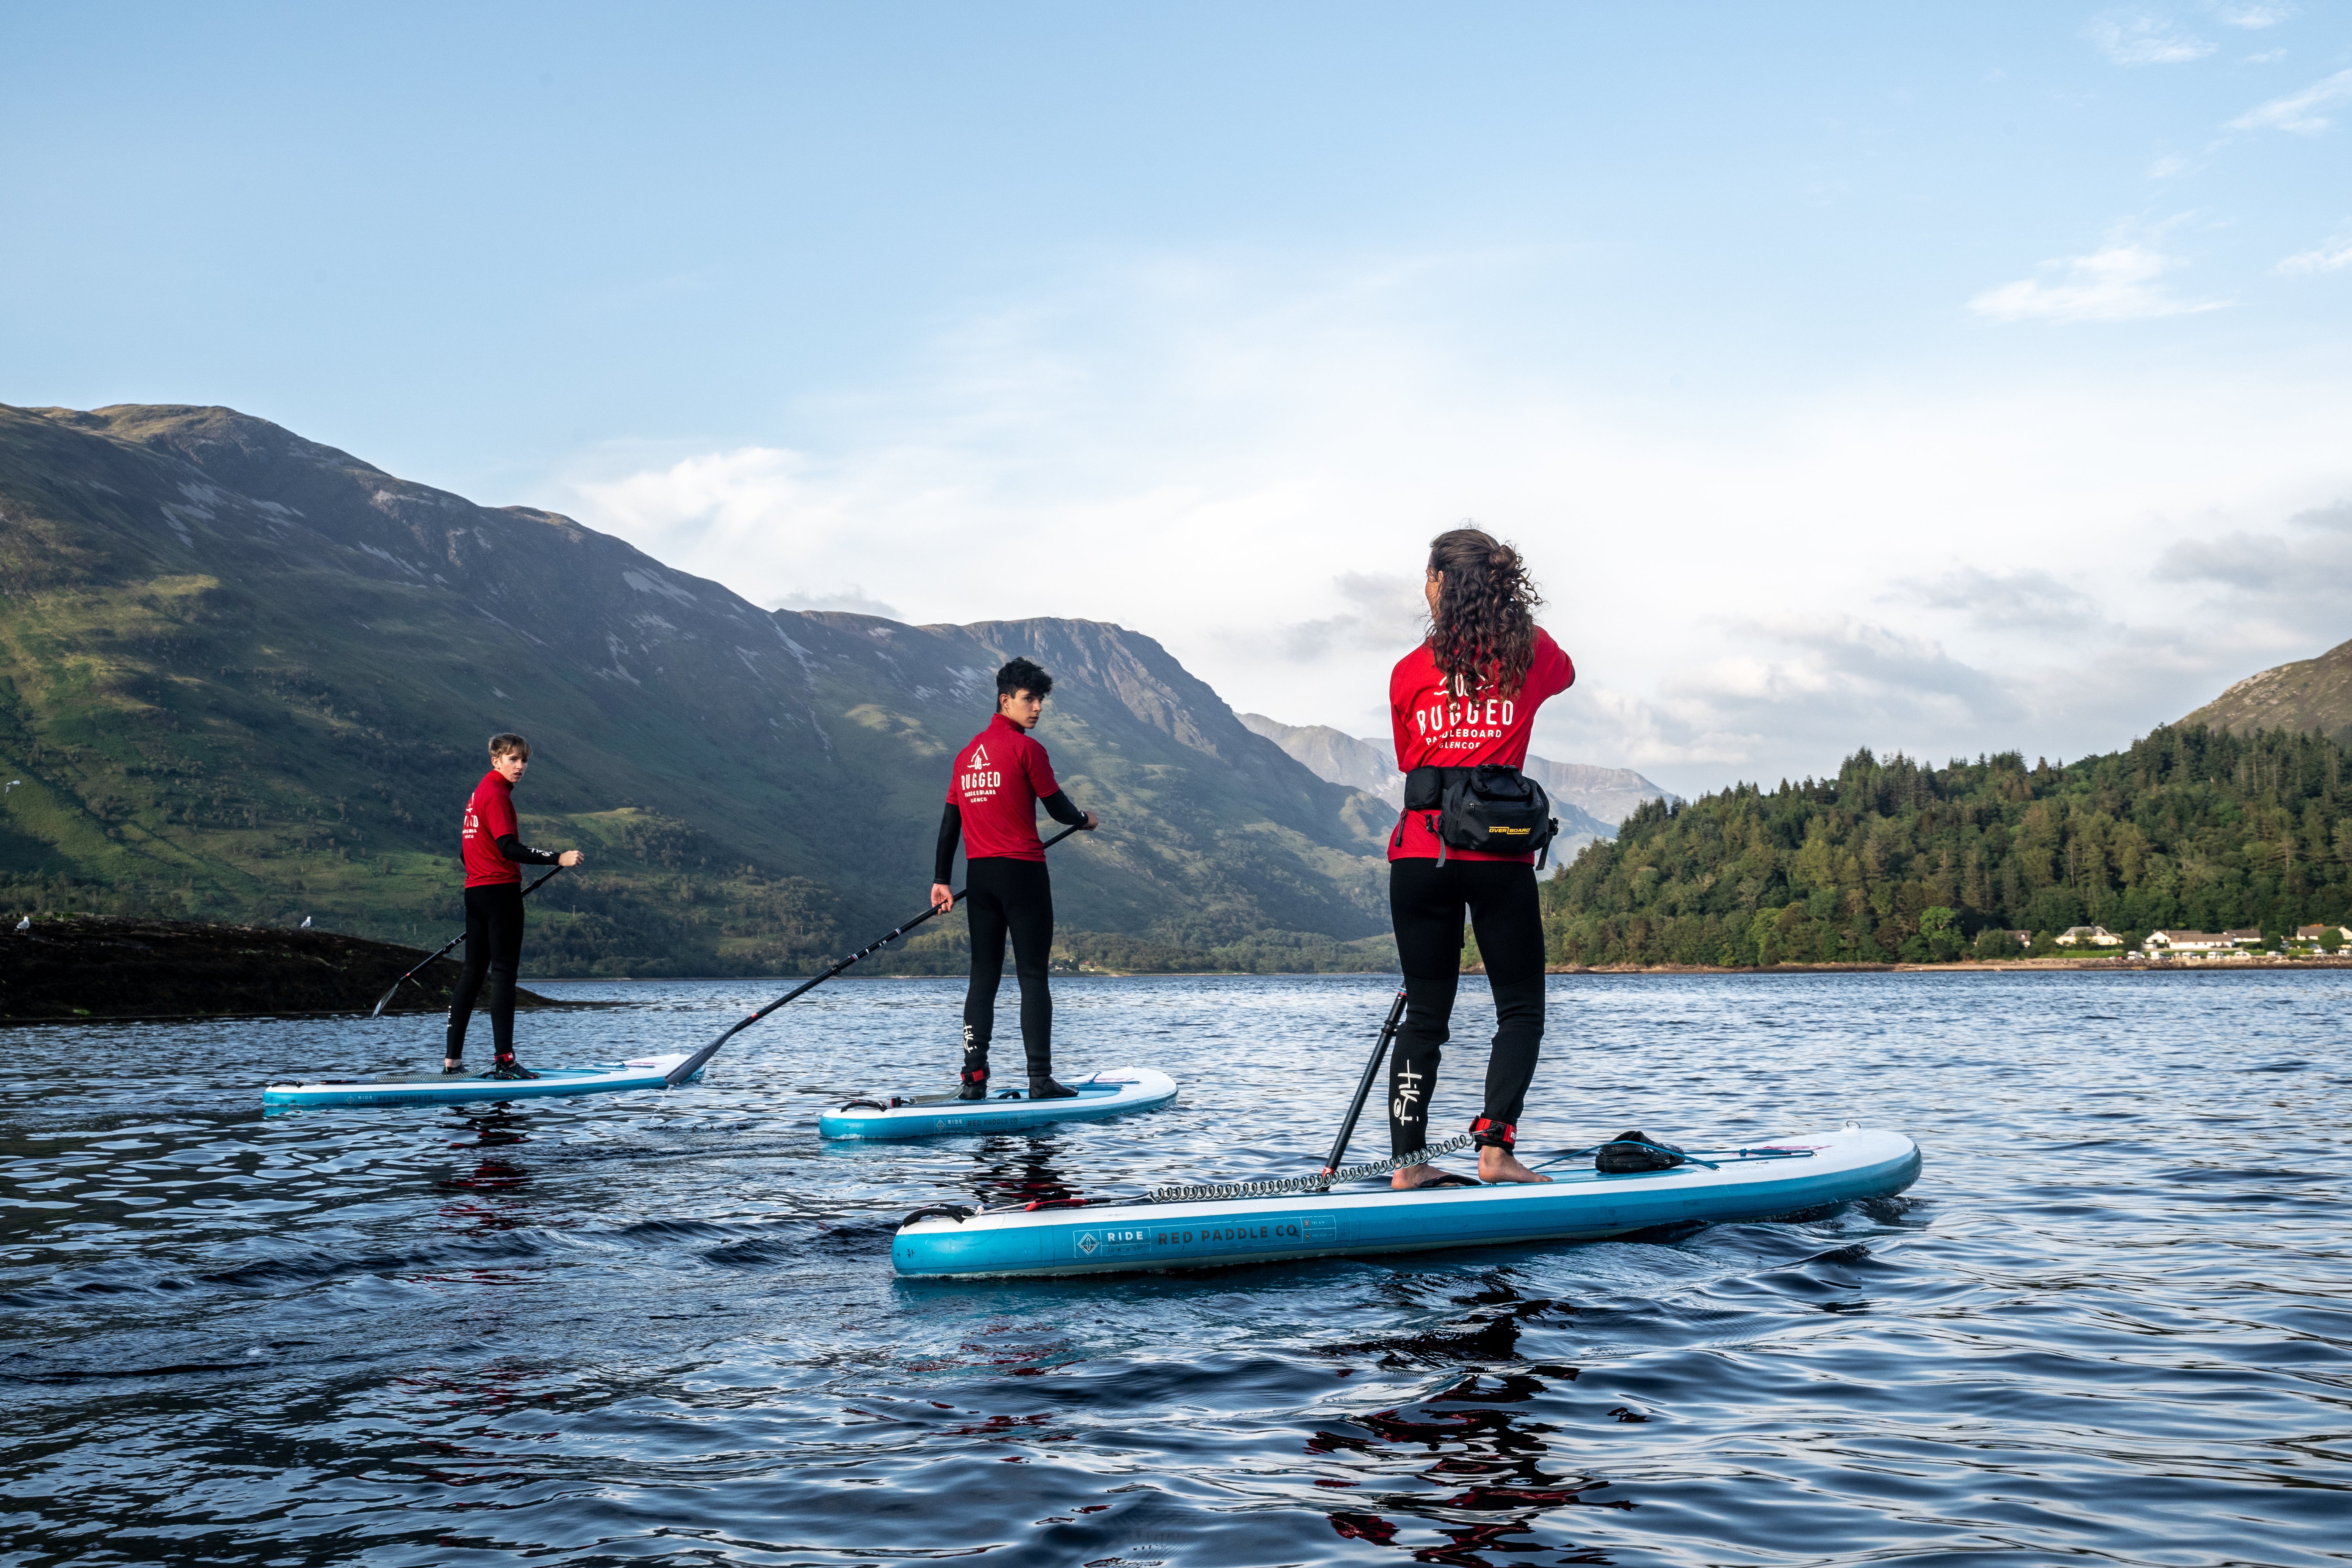 As well as getting some exercise, at Signal Rock Glencoe, paddleboarding is a great way to take in the views